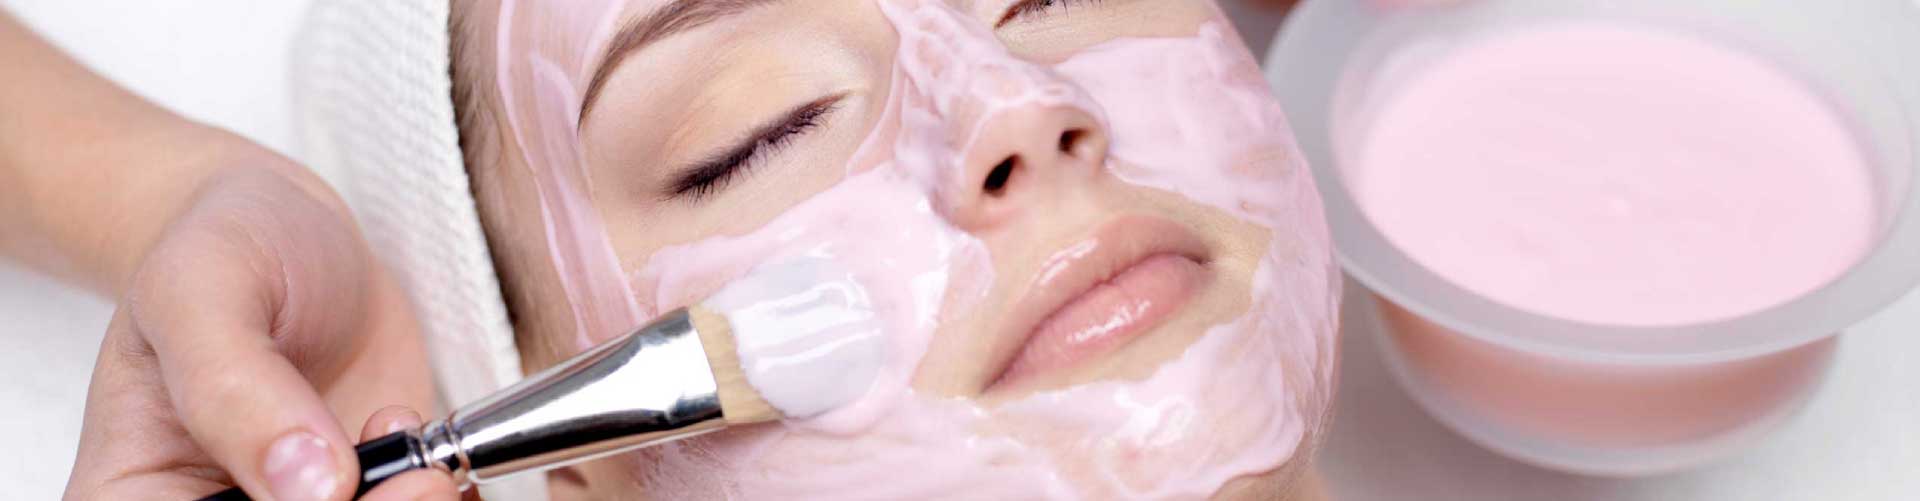 Deep Cleansing Facial The Best Spa In Edison Middlesex County New Jersey Call Us To Make